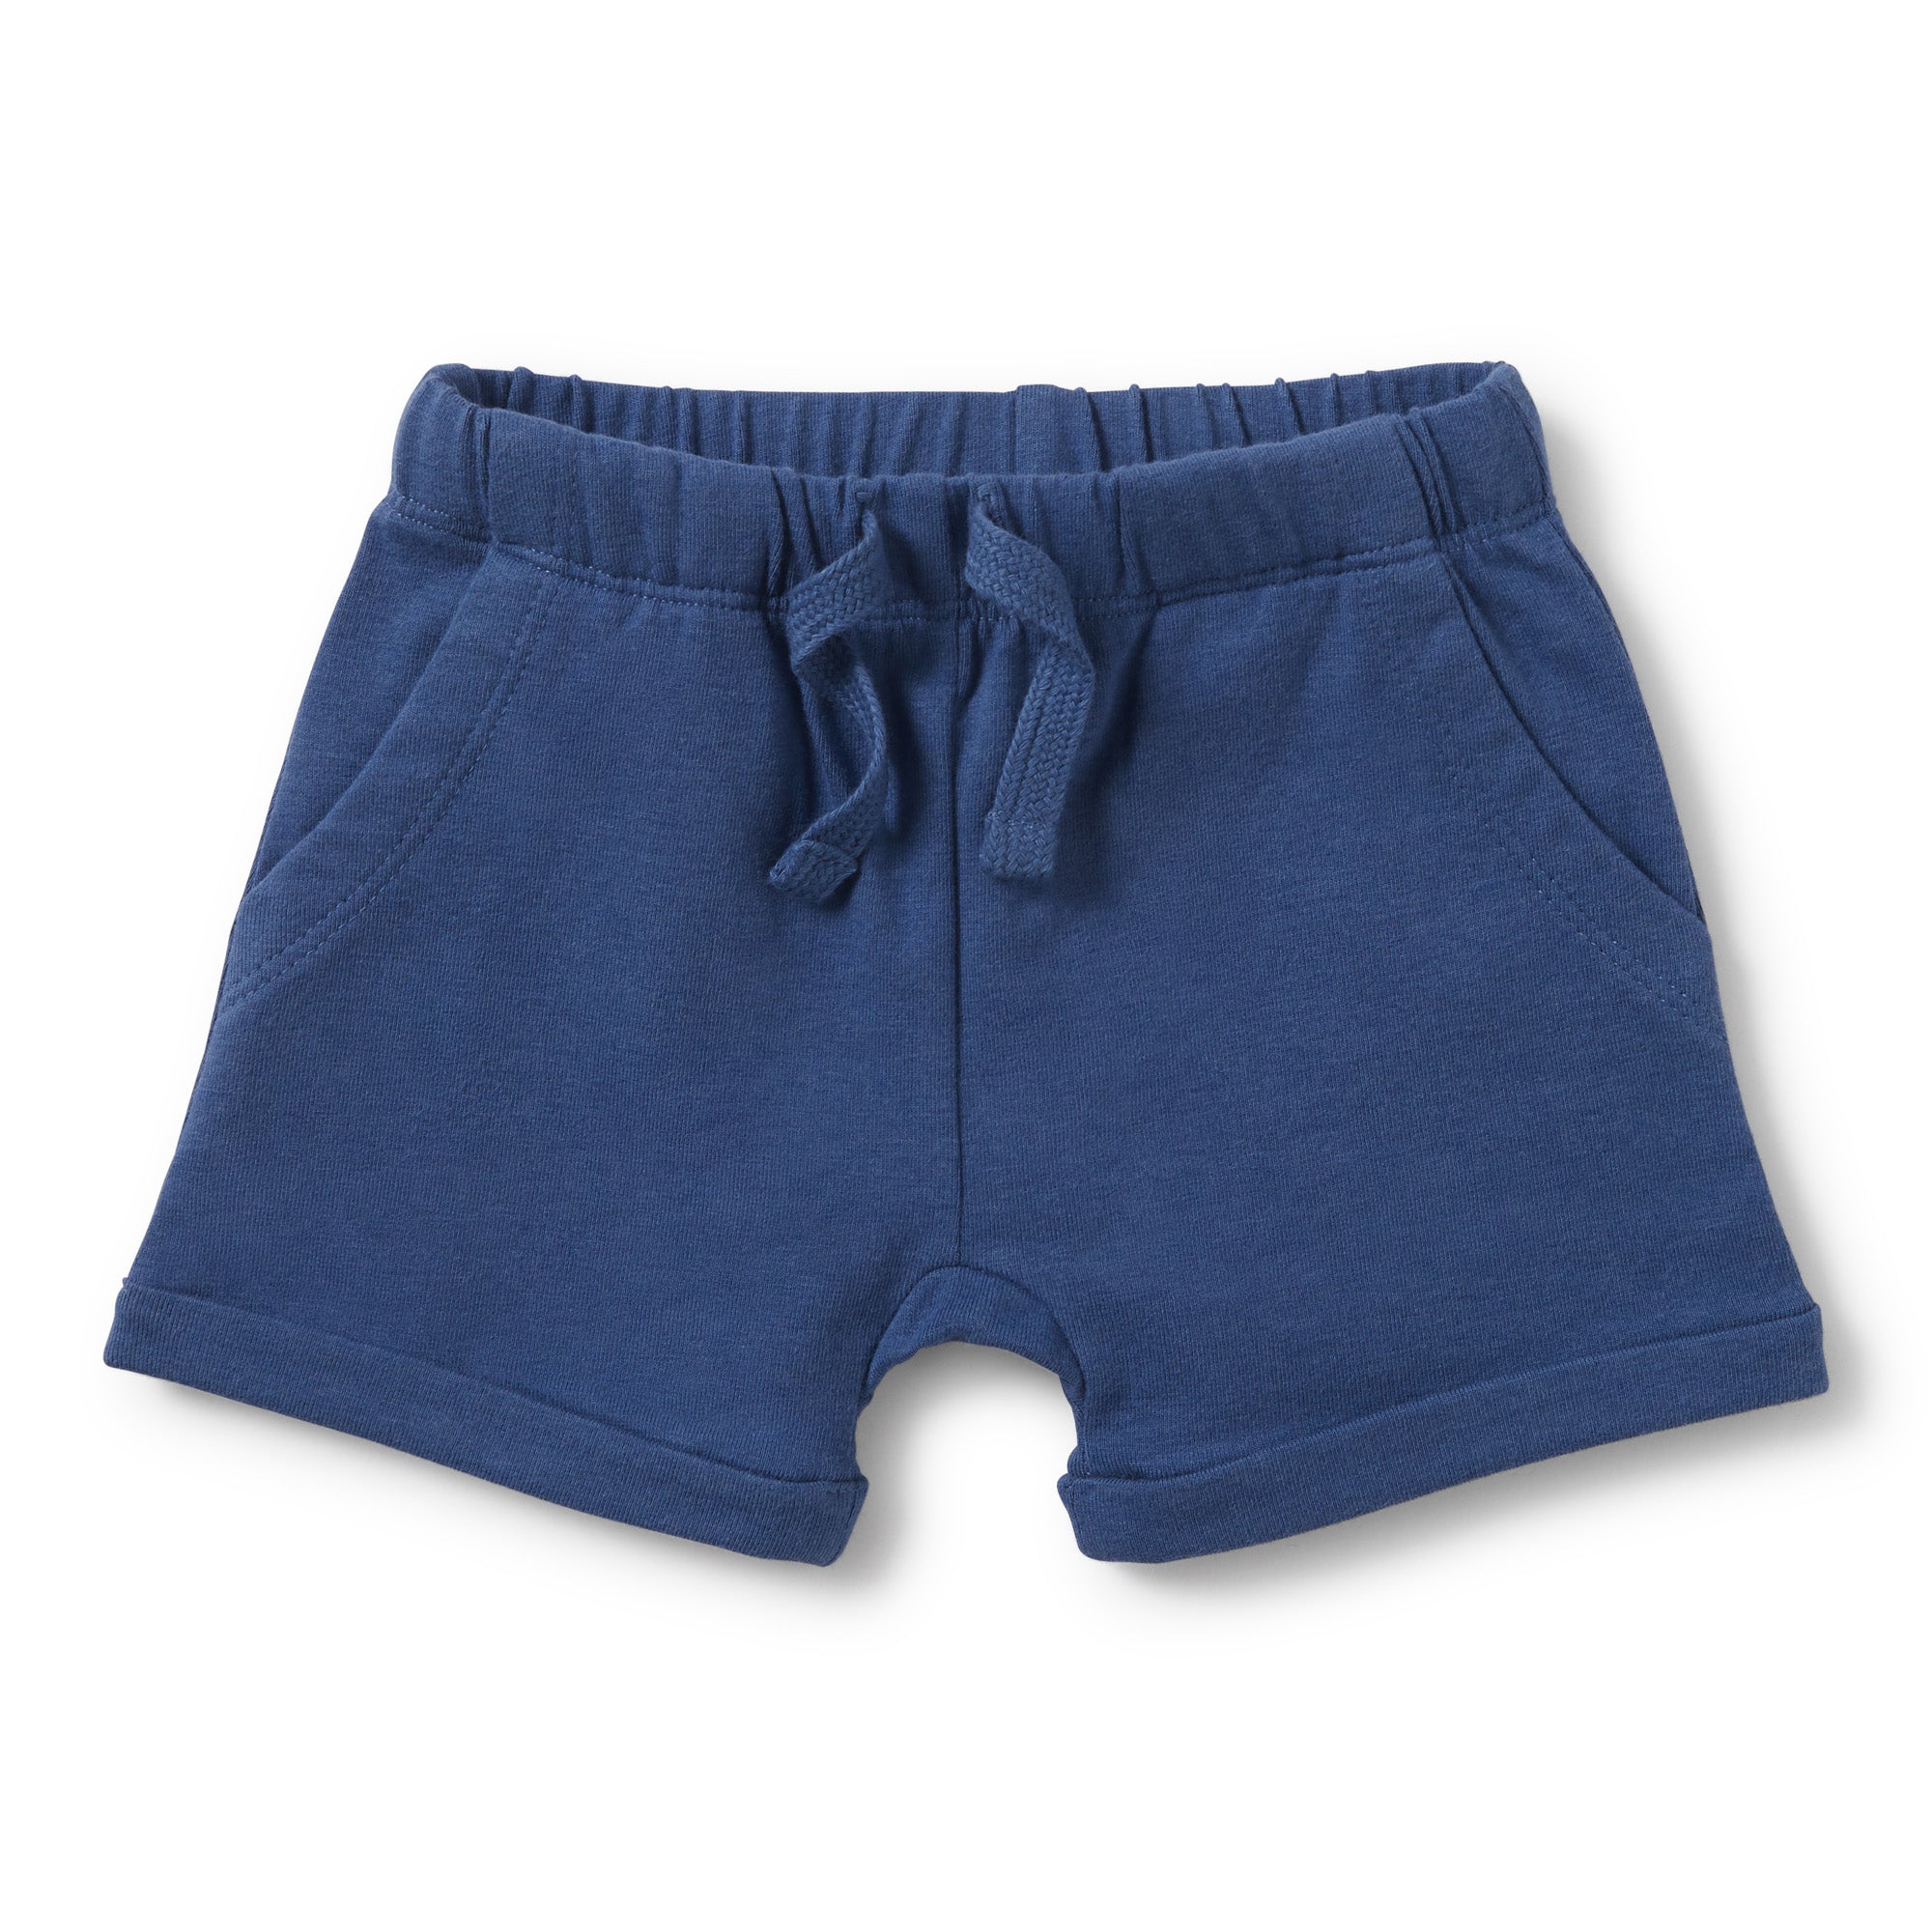 TRUE NAVY SLOUCH POCKET SHORTS - Wilson and Frenchy